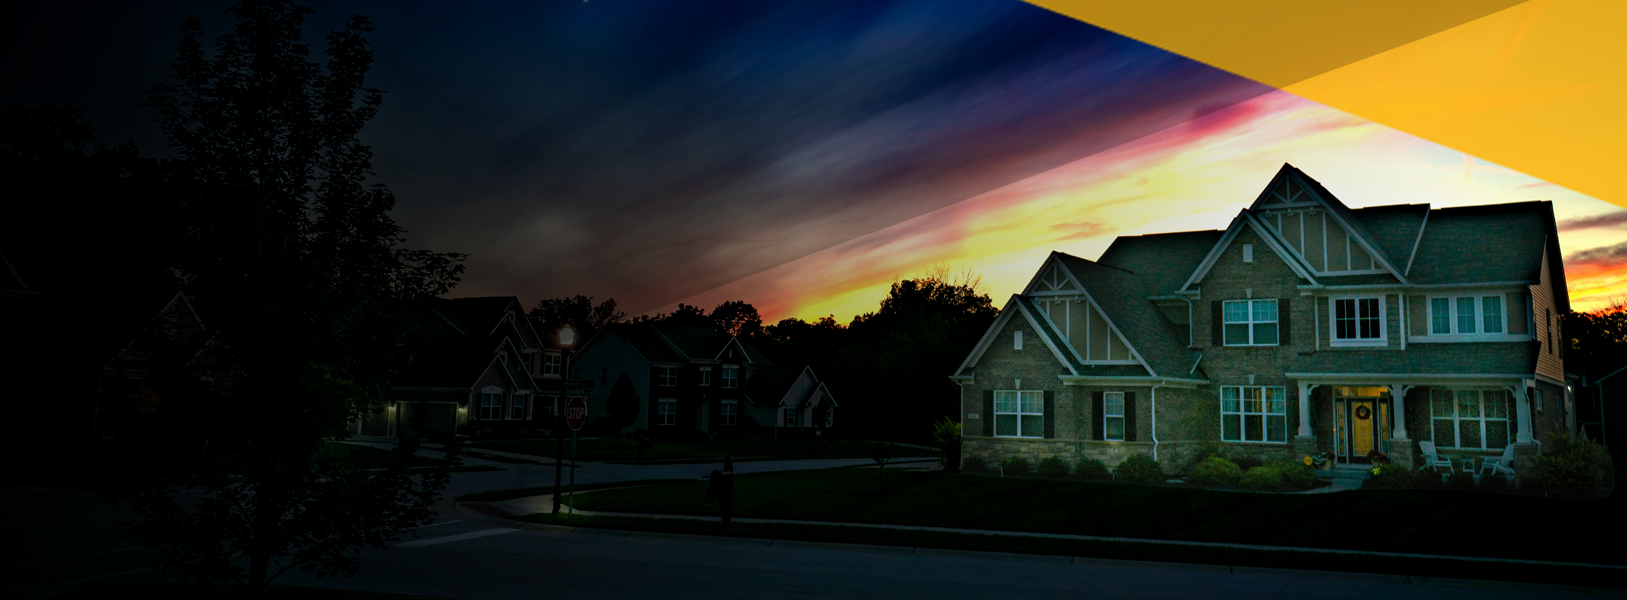 Guardian Alarm smart home alarm system protecting a home at dusk